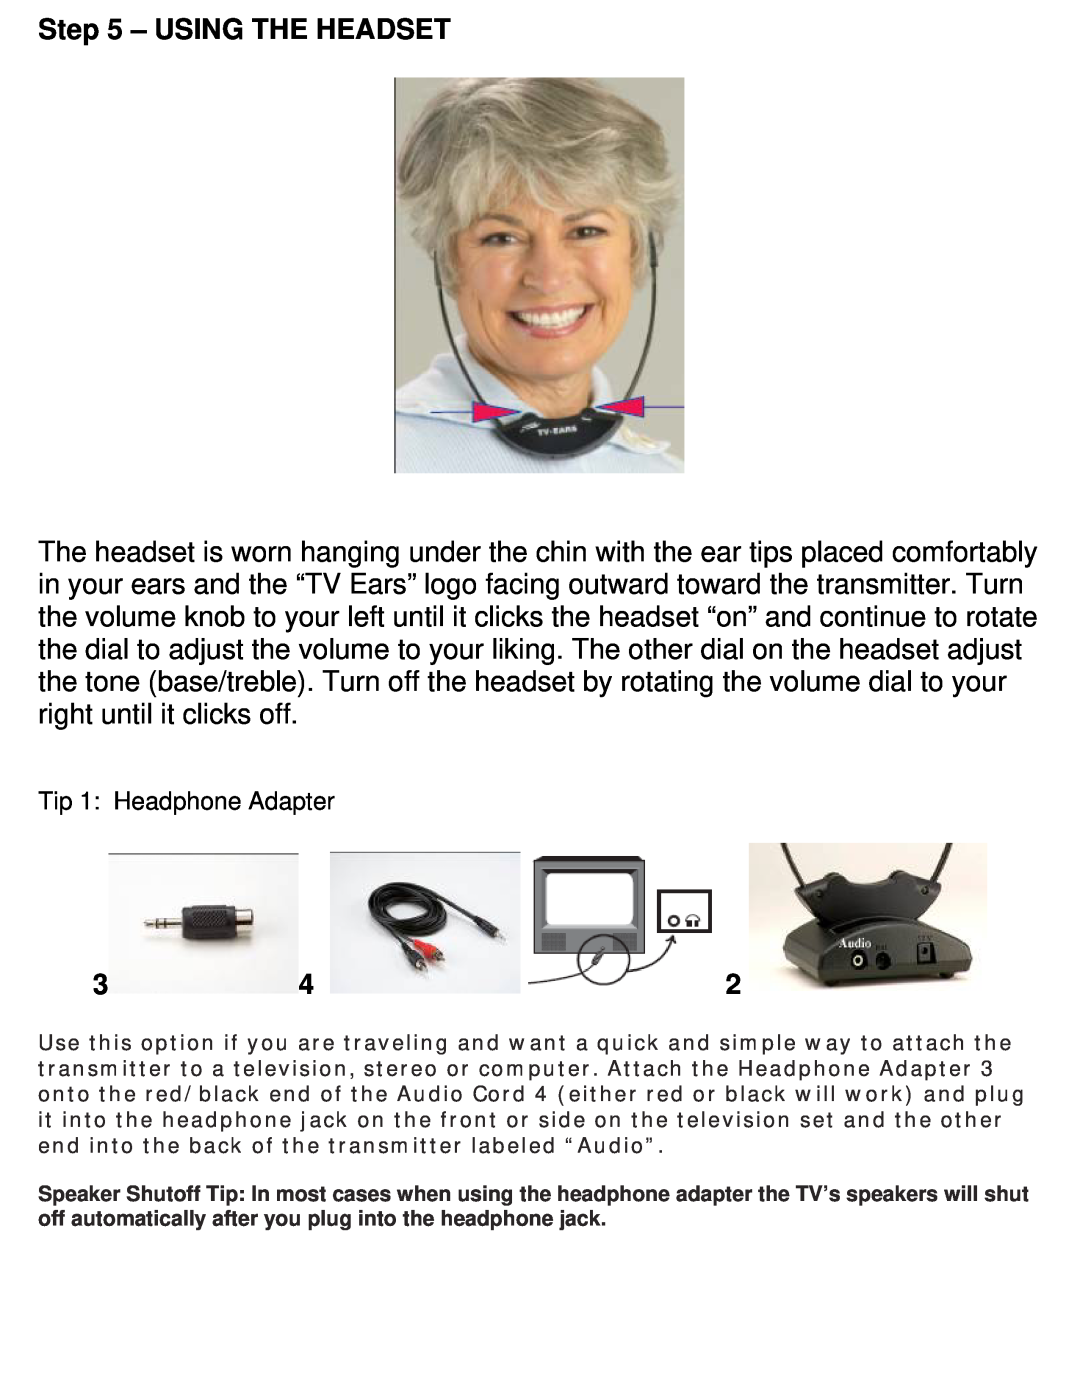 TV Ears installation instructions Using The Headset, Tip 1 Headphone Adapter 